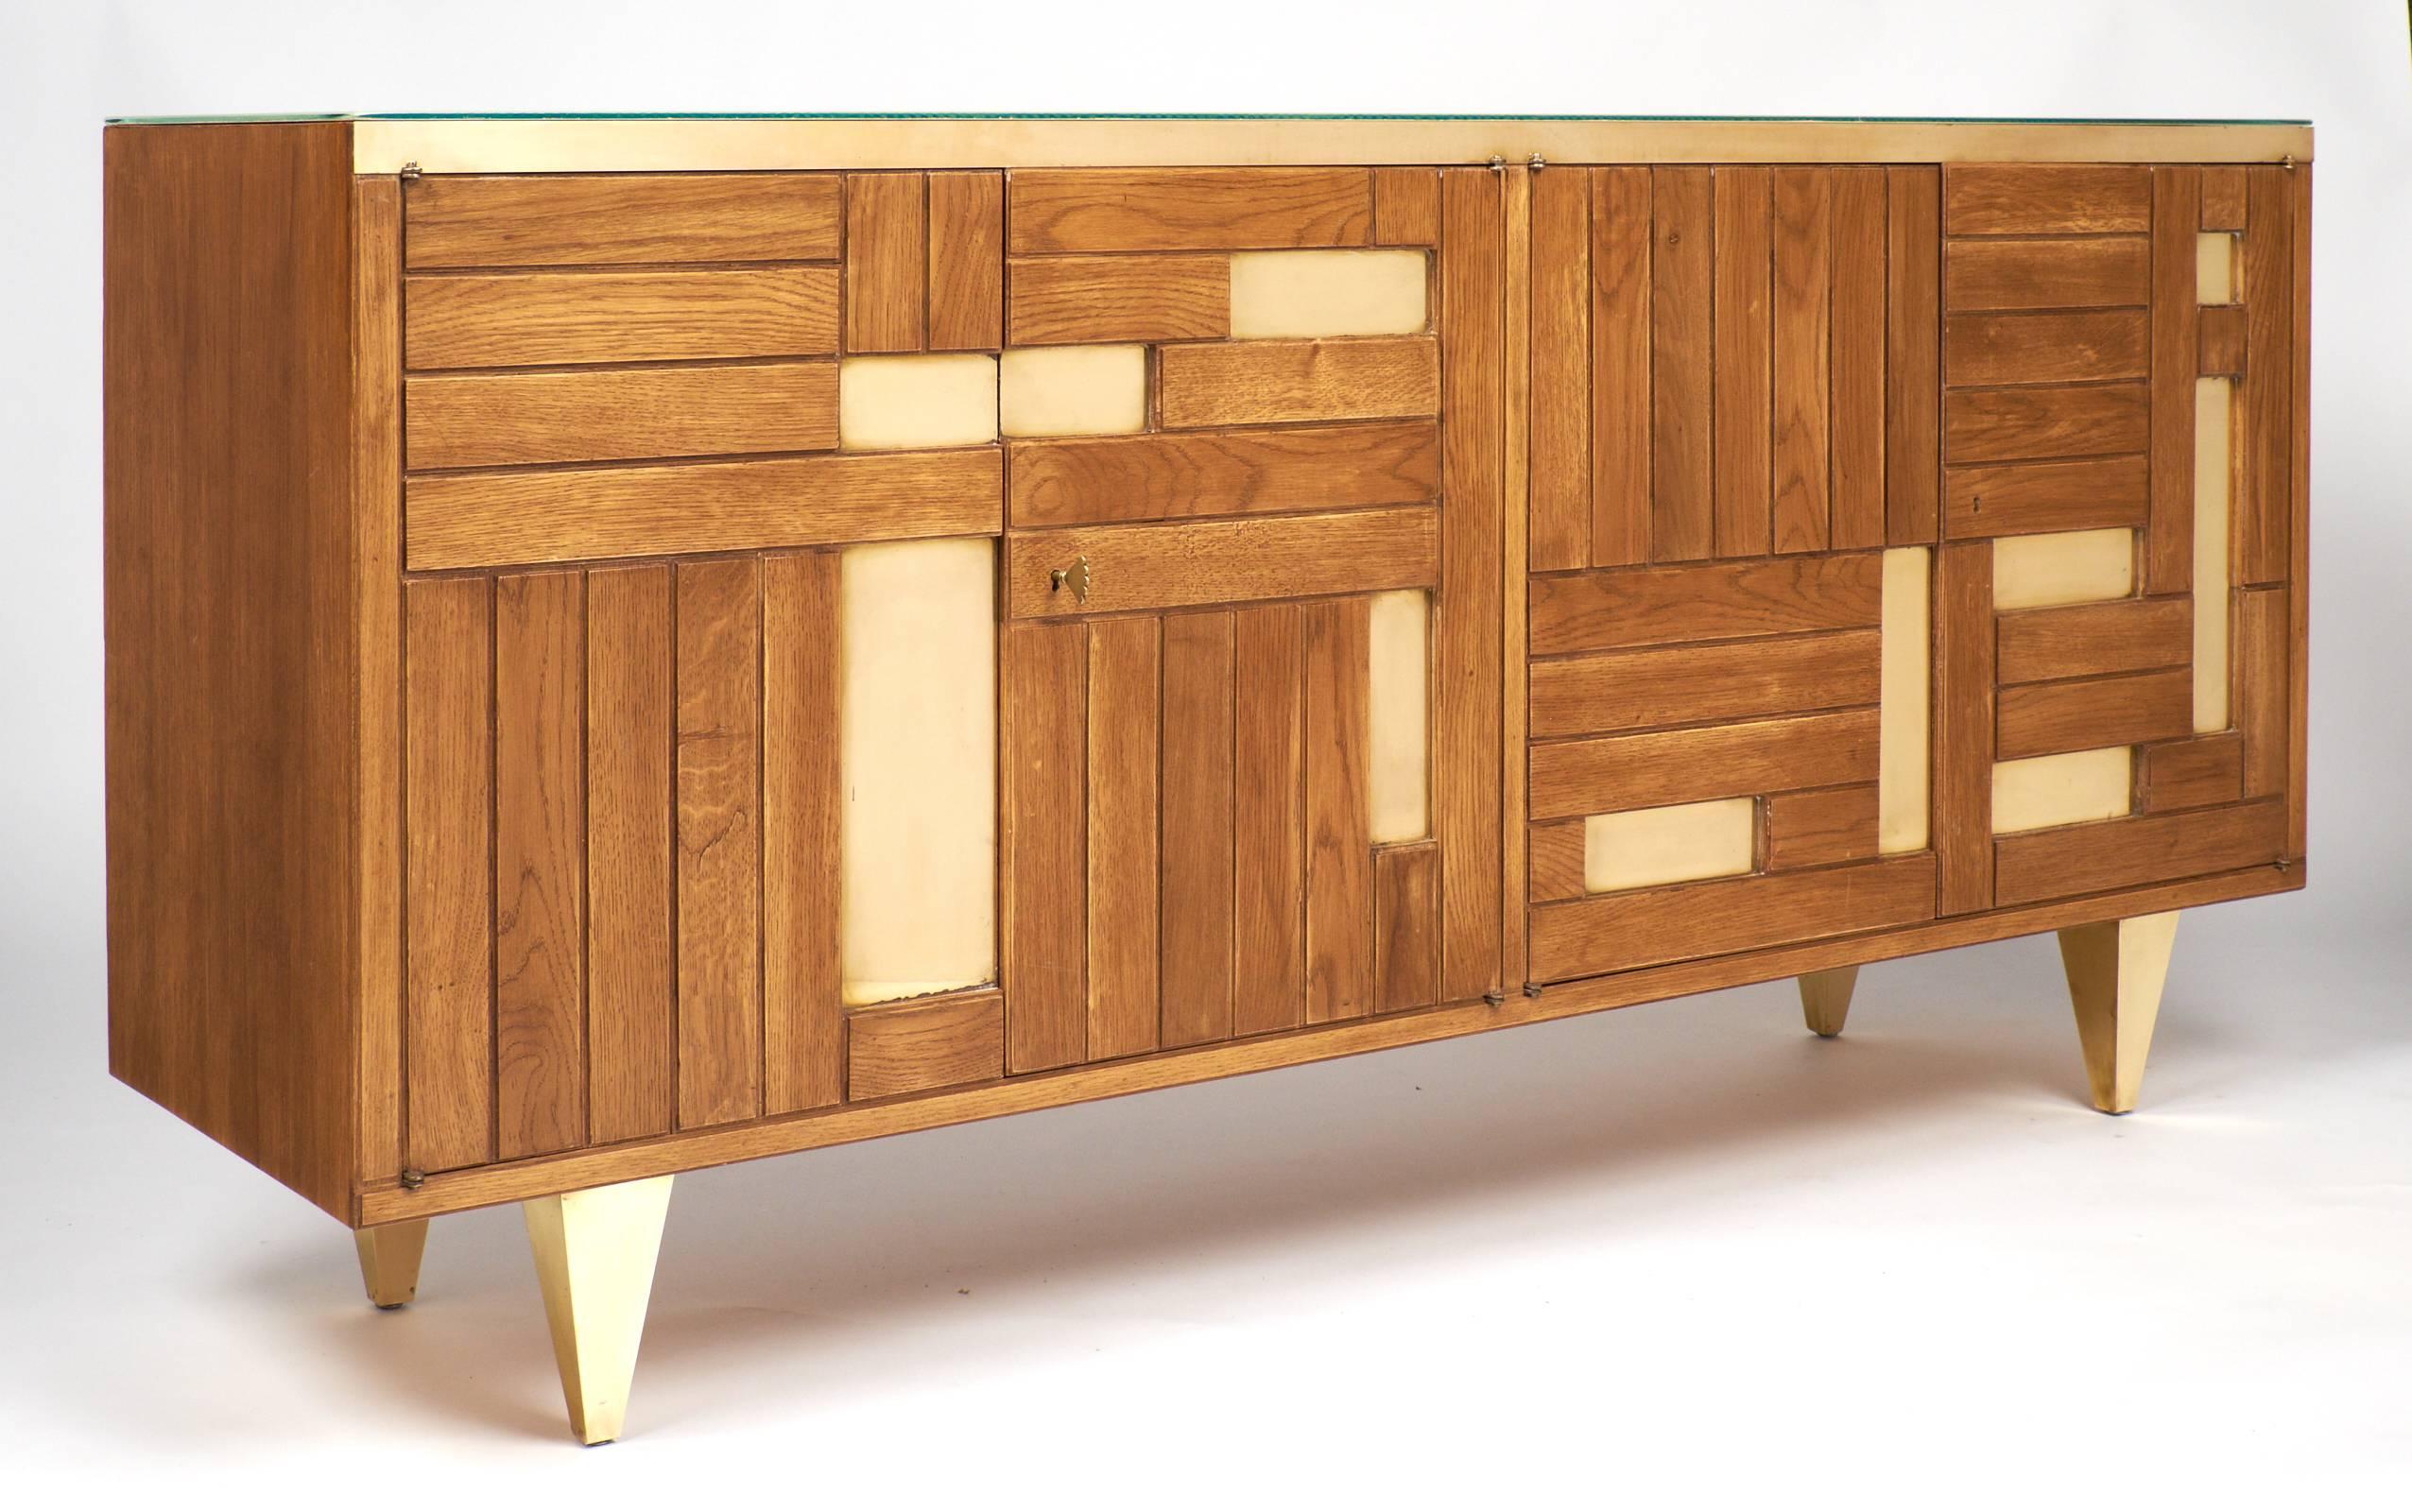 Mid-20th Century Italian Modernist Oak and Parquetry Buffet